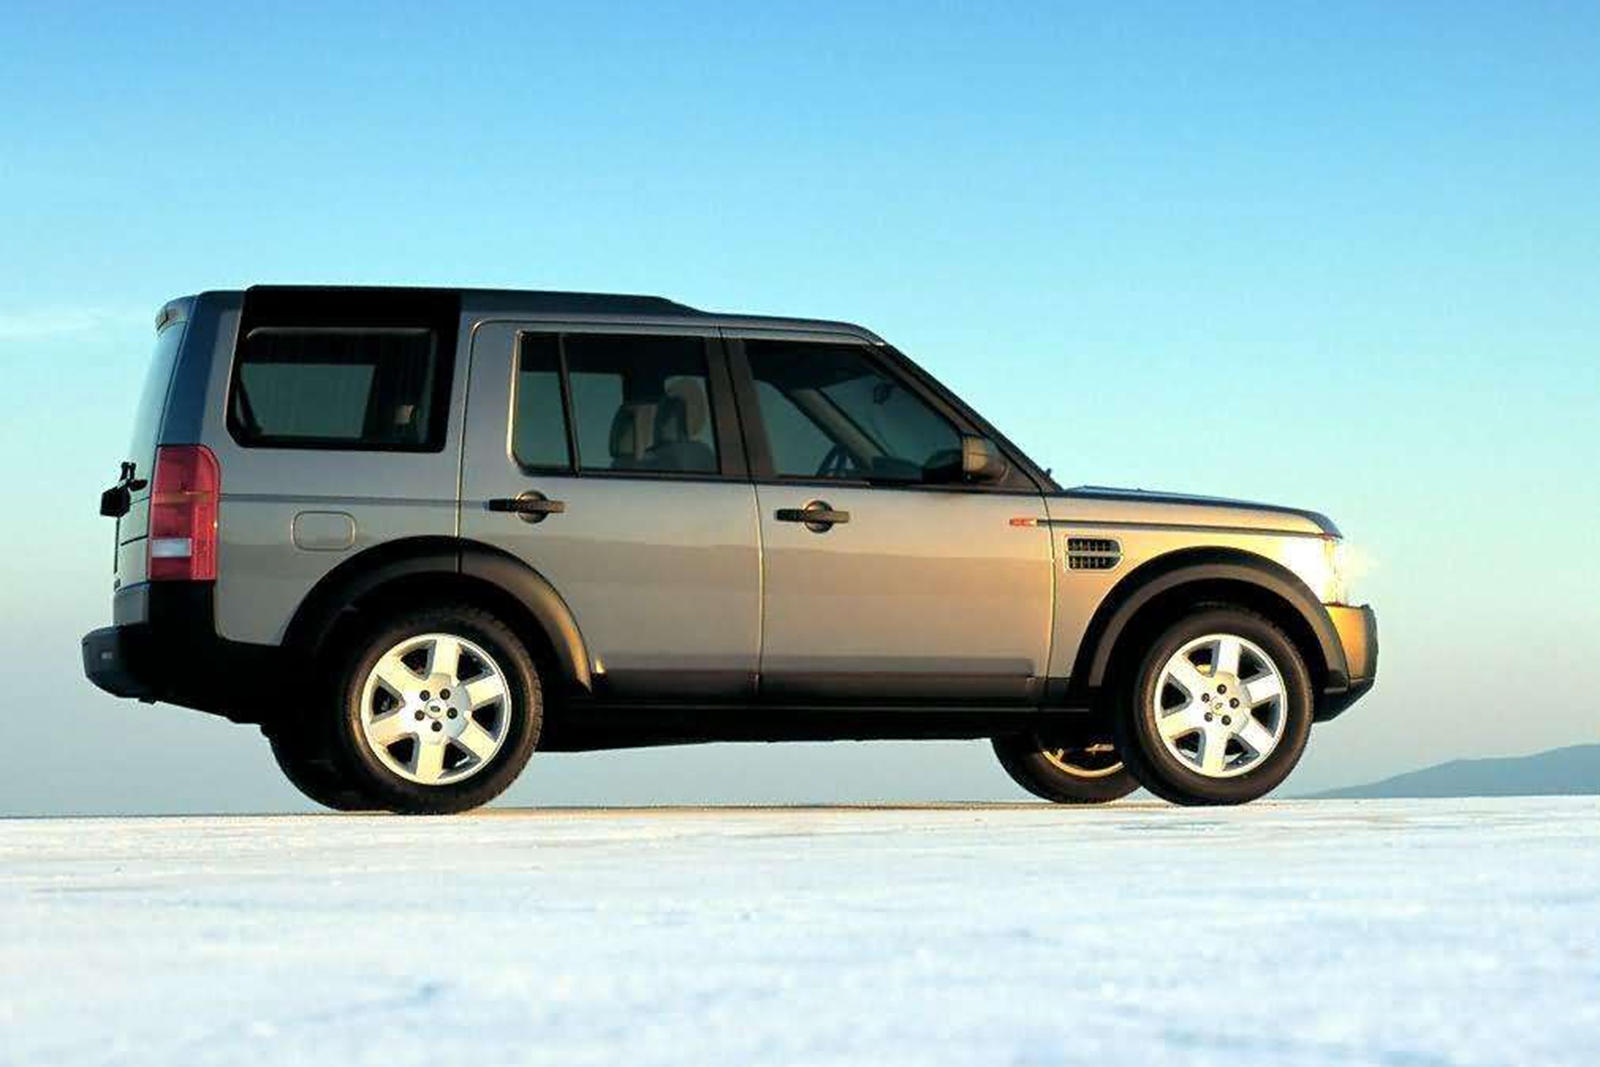 Балу дискавери. Ленд Ровер Дискавери 3. Ленд Ровер Дискавери 3 2005. Land Rover Discovery lr3 2005. Land Rover lr3/Discovery 3.